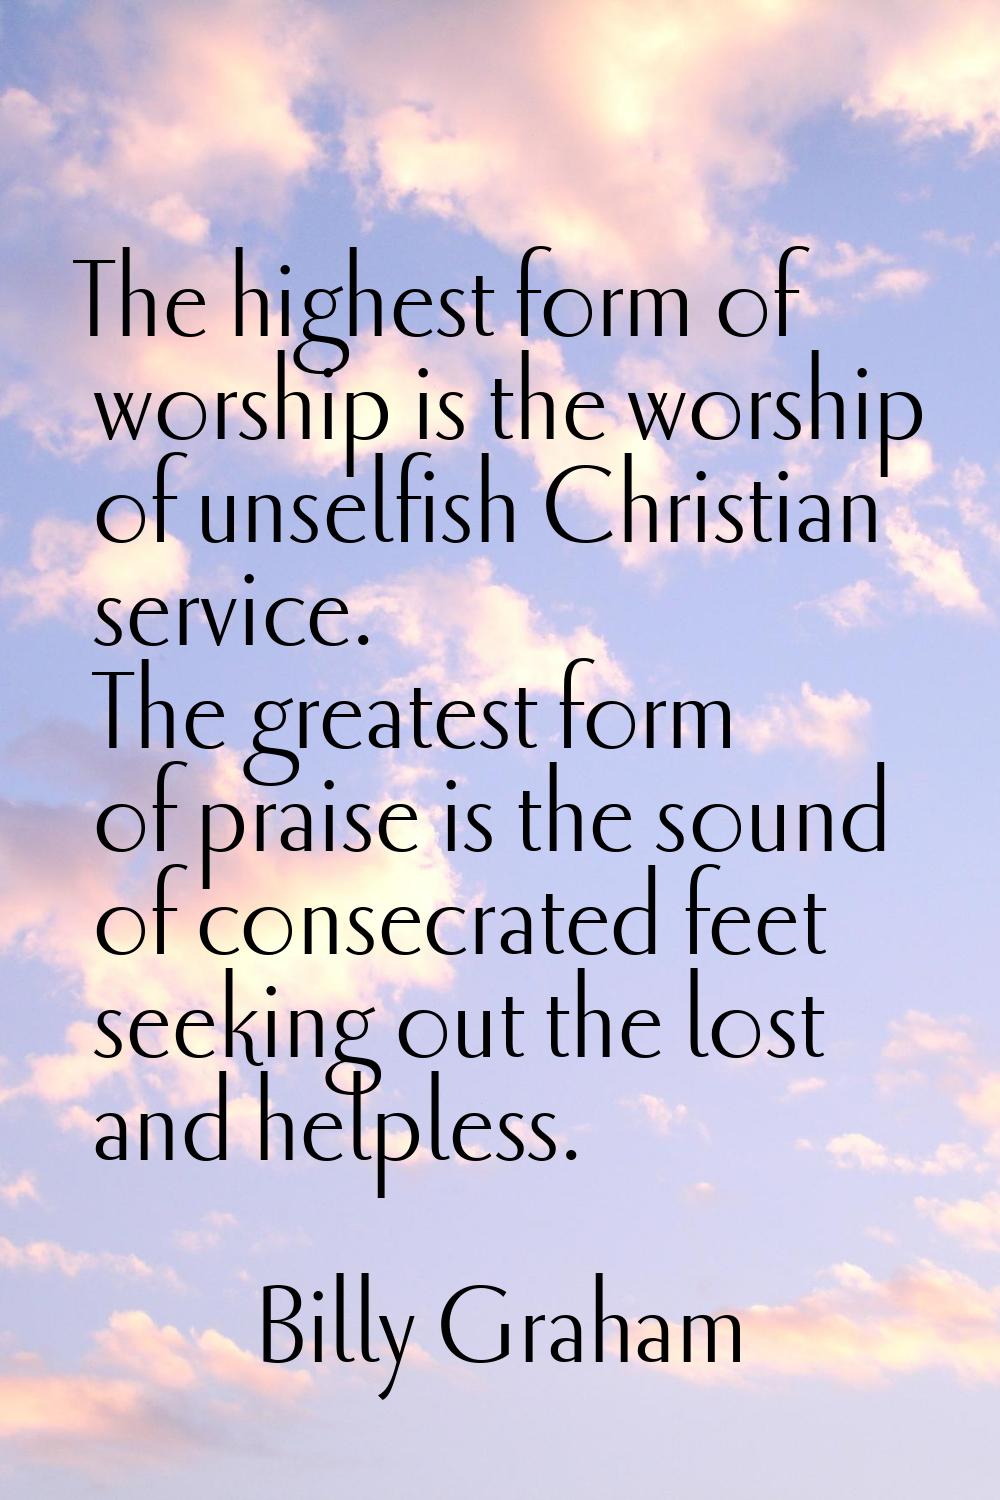 The highest form of worship is the worship of unselfish Christian service. The greatest form of pra